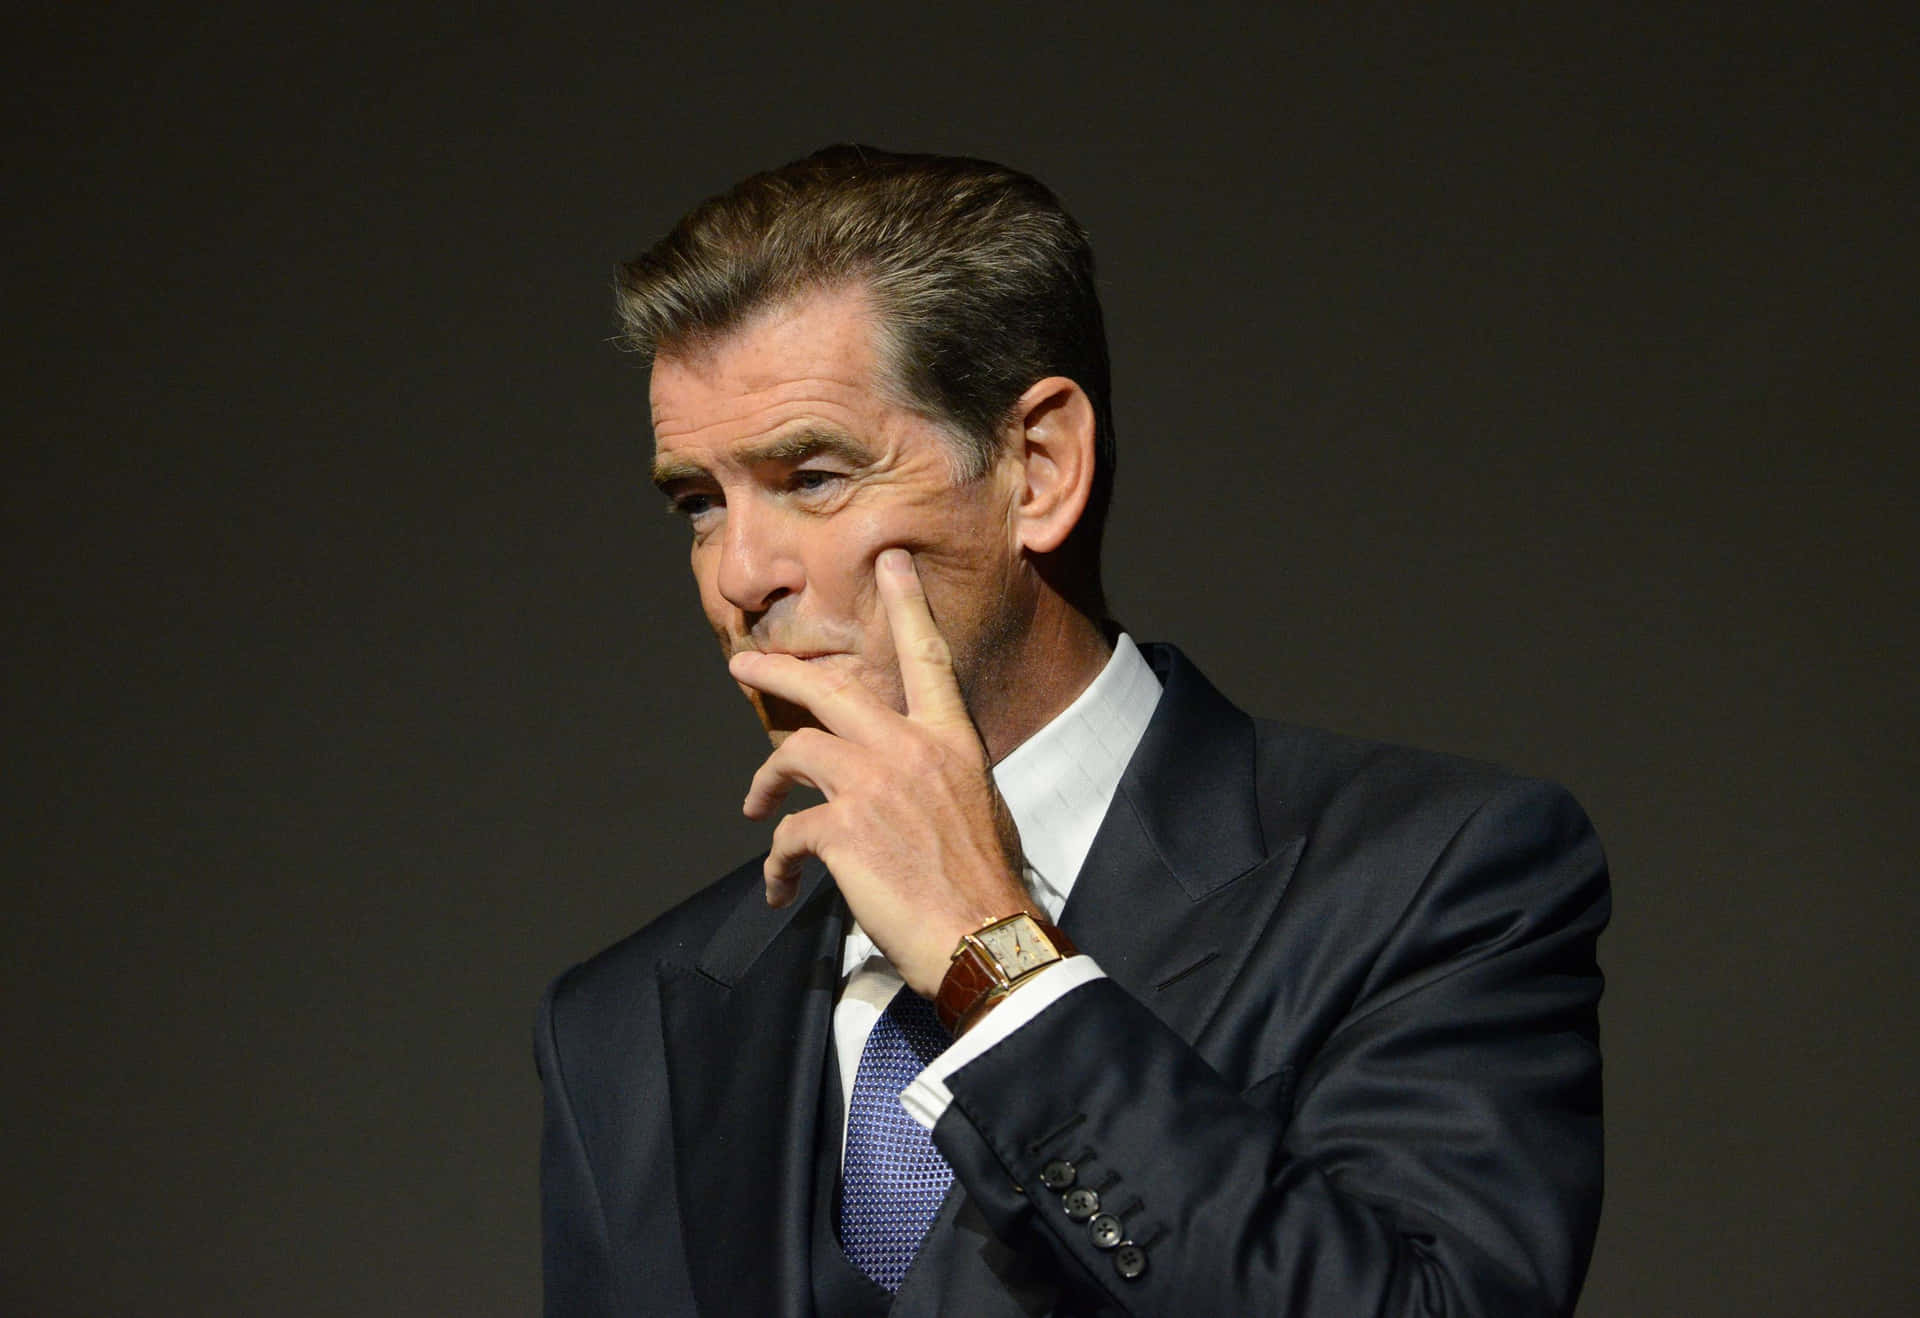 Caption: Iconic Pierce Brosnan in a thoughtful pose Wallpaper